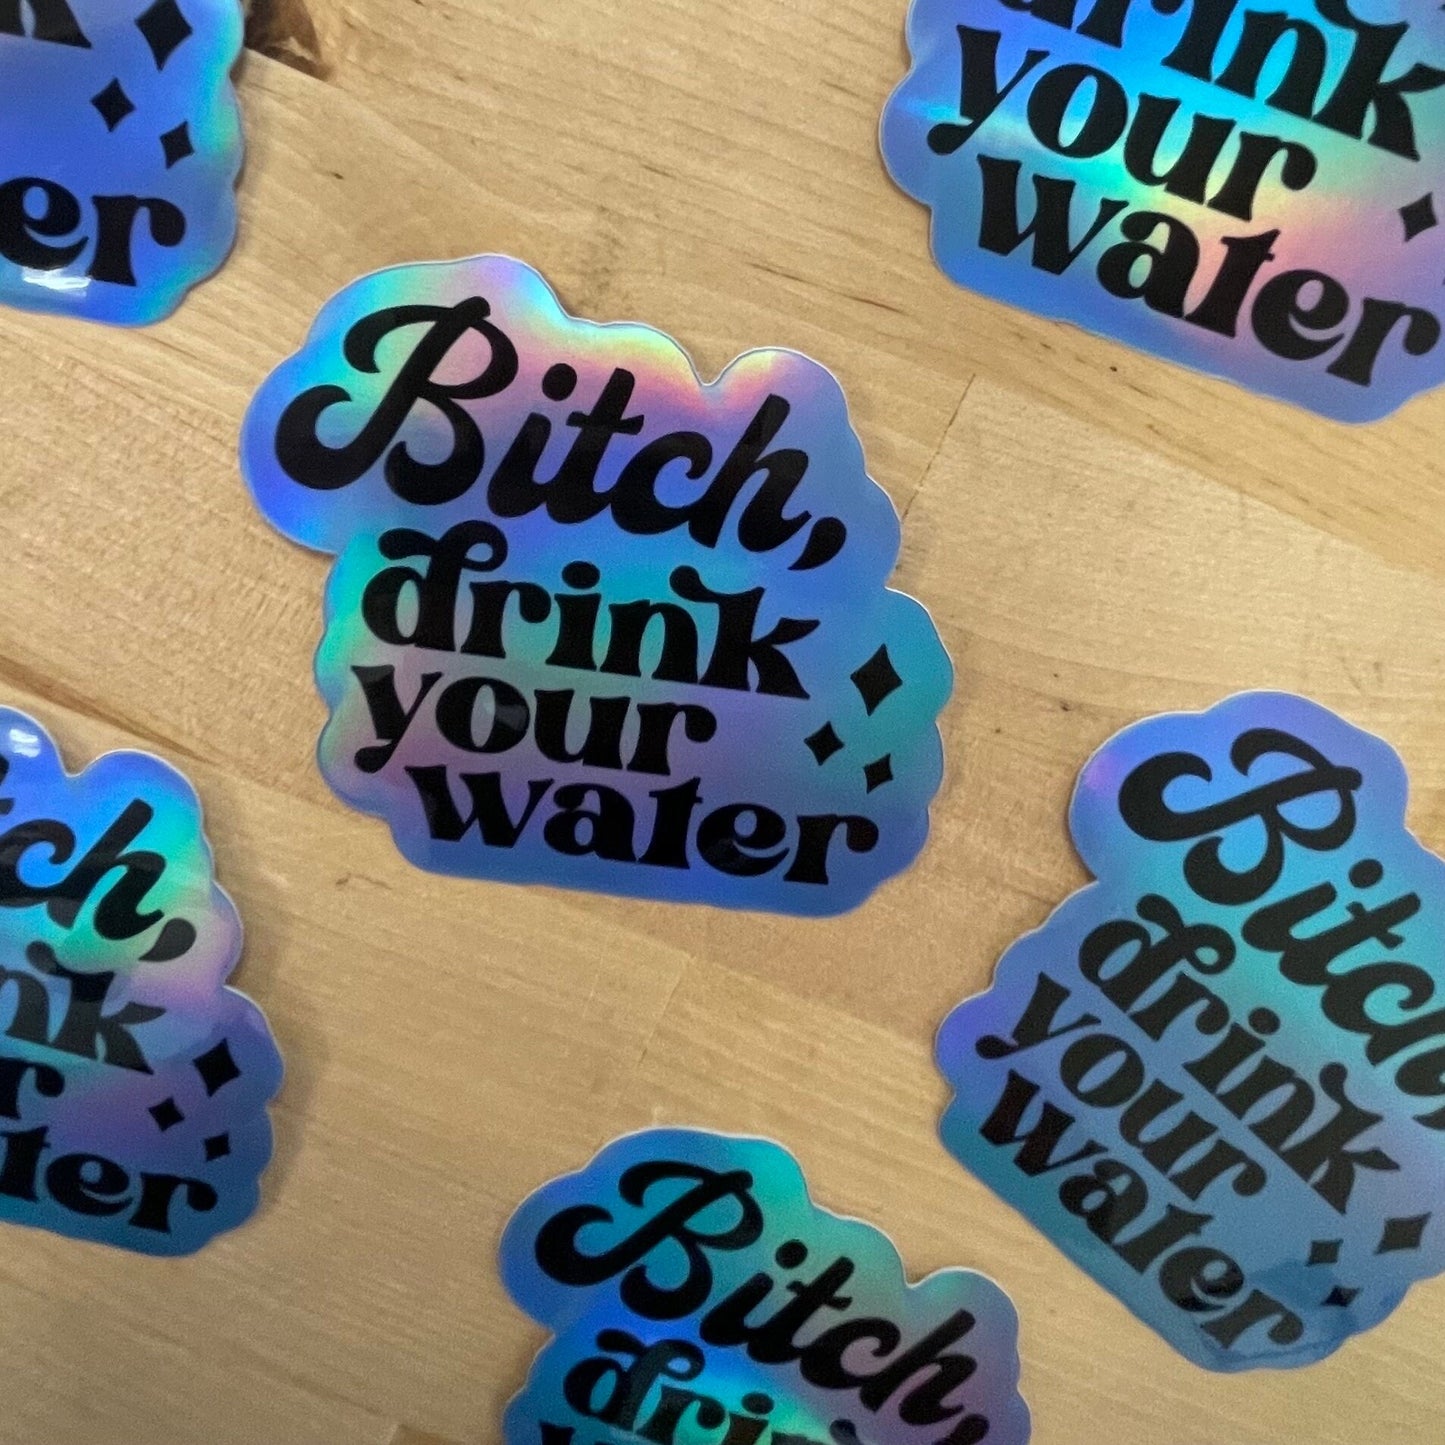 Bitch drink your water, 3” Holographic Sticker